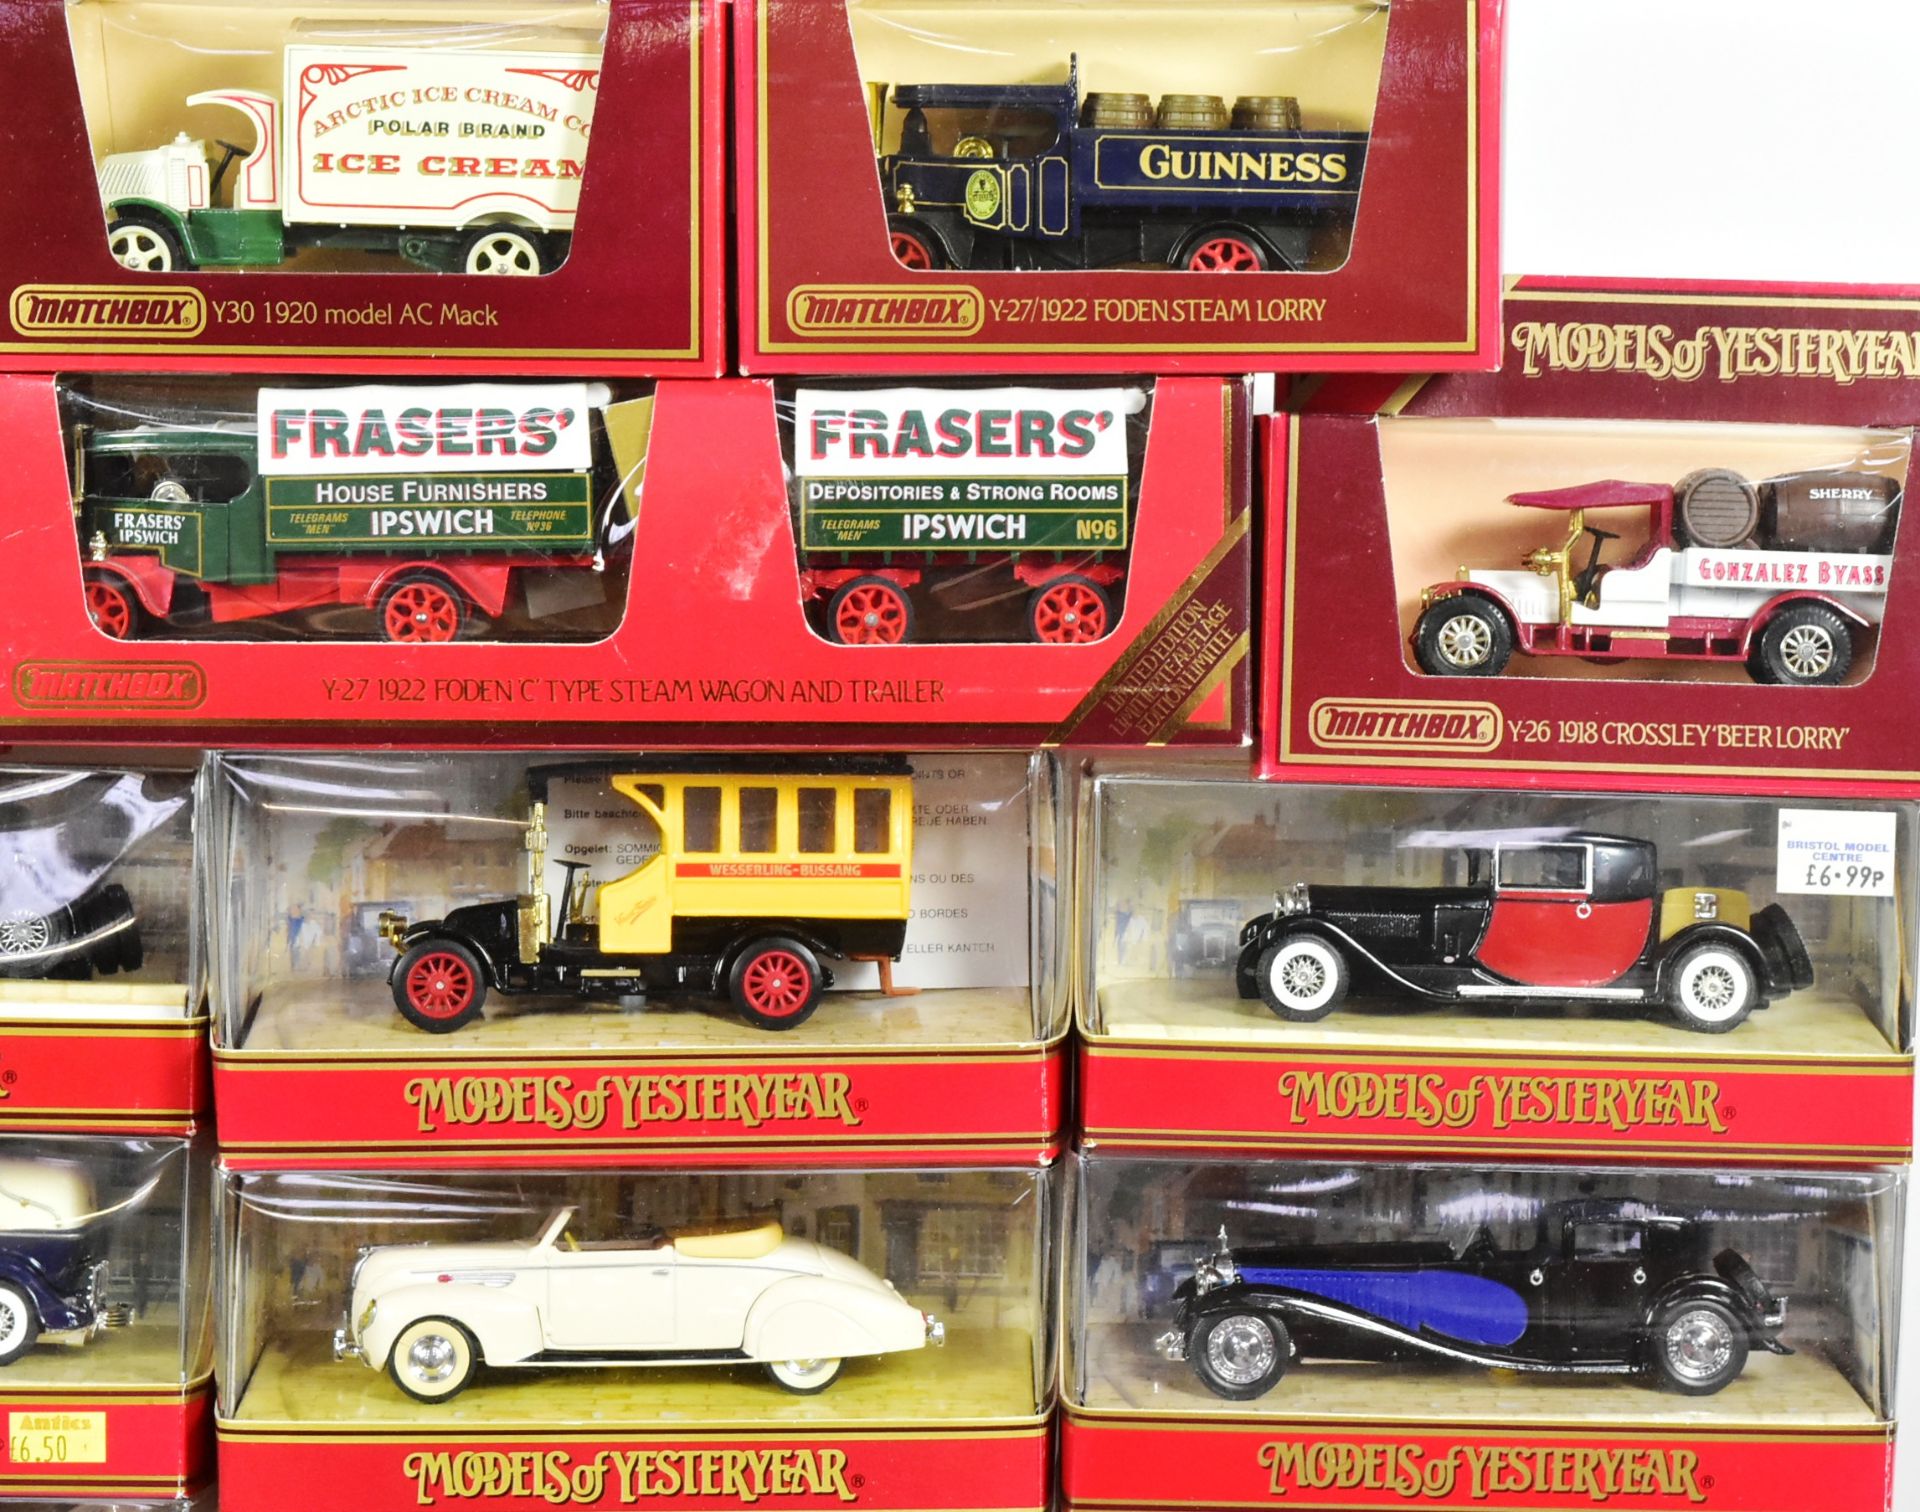 DIECAST - COLLECTION OF MATCHBOX MODELS OF YESTERYEAR - Image 3 of 5